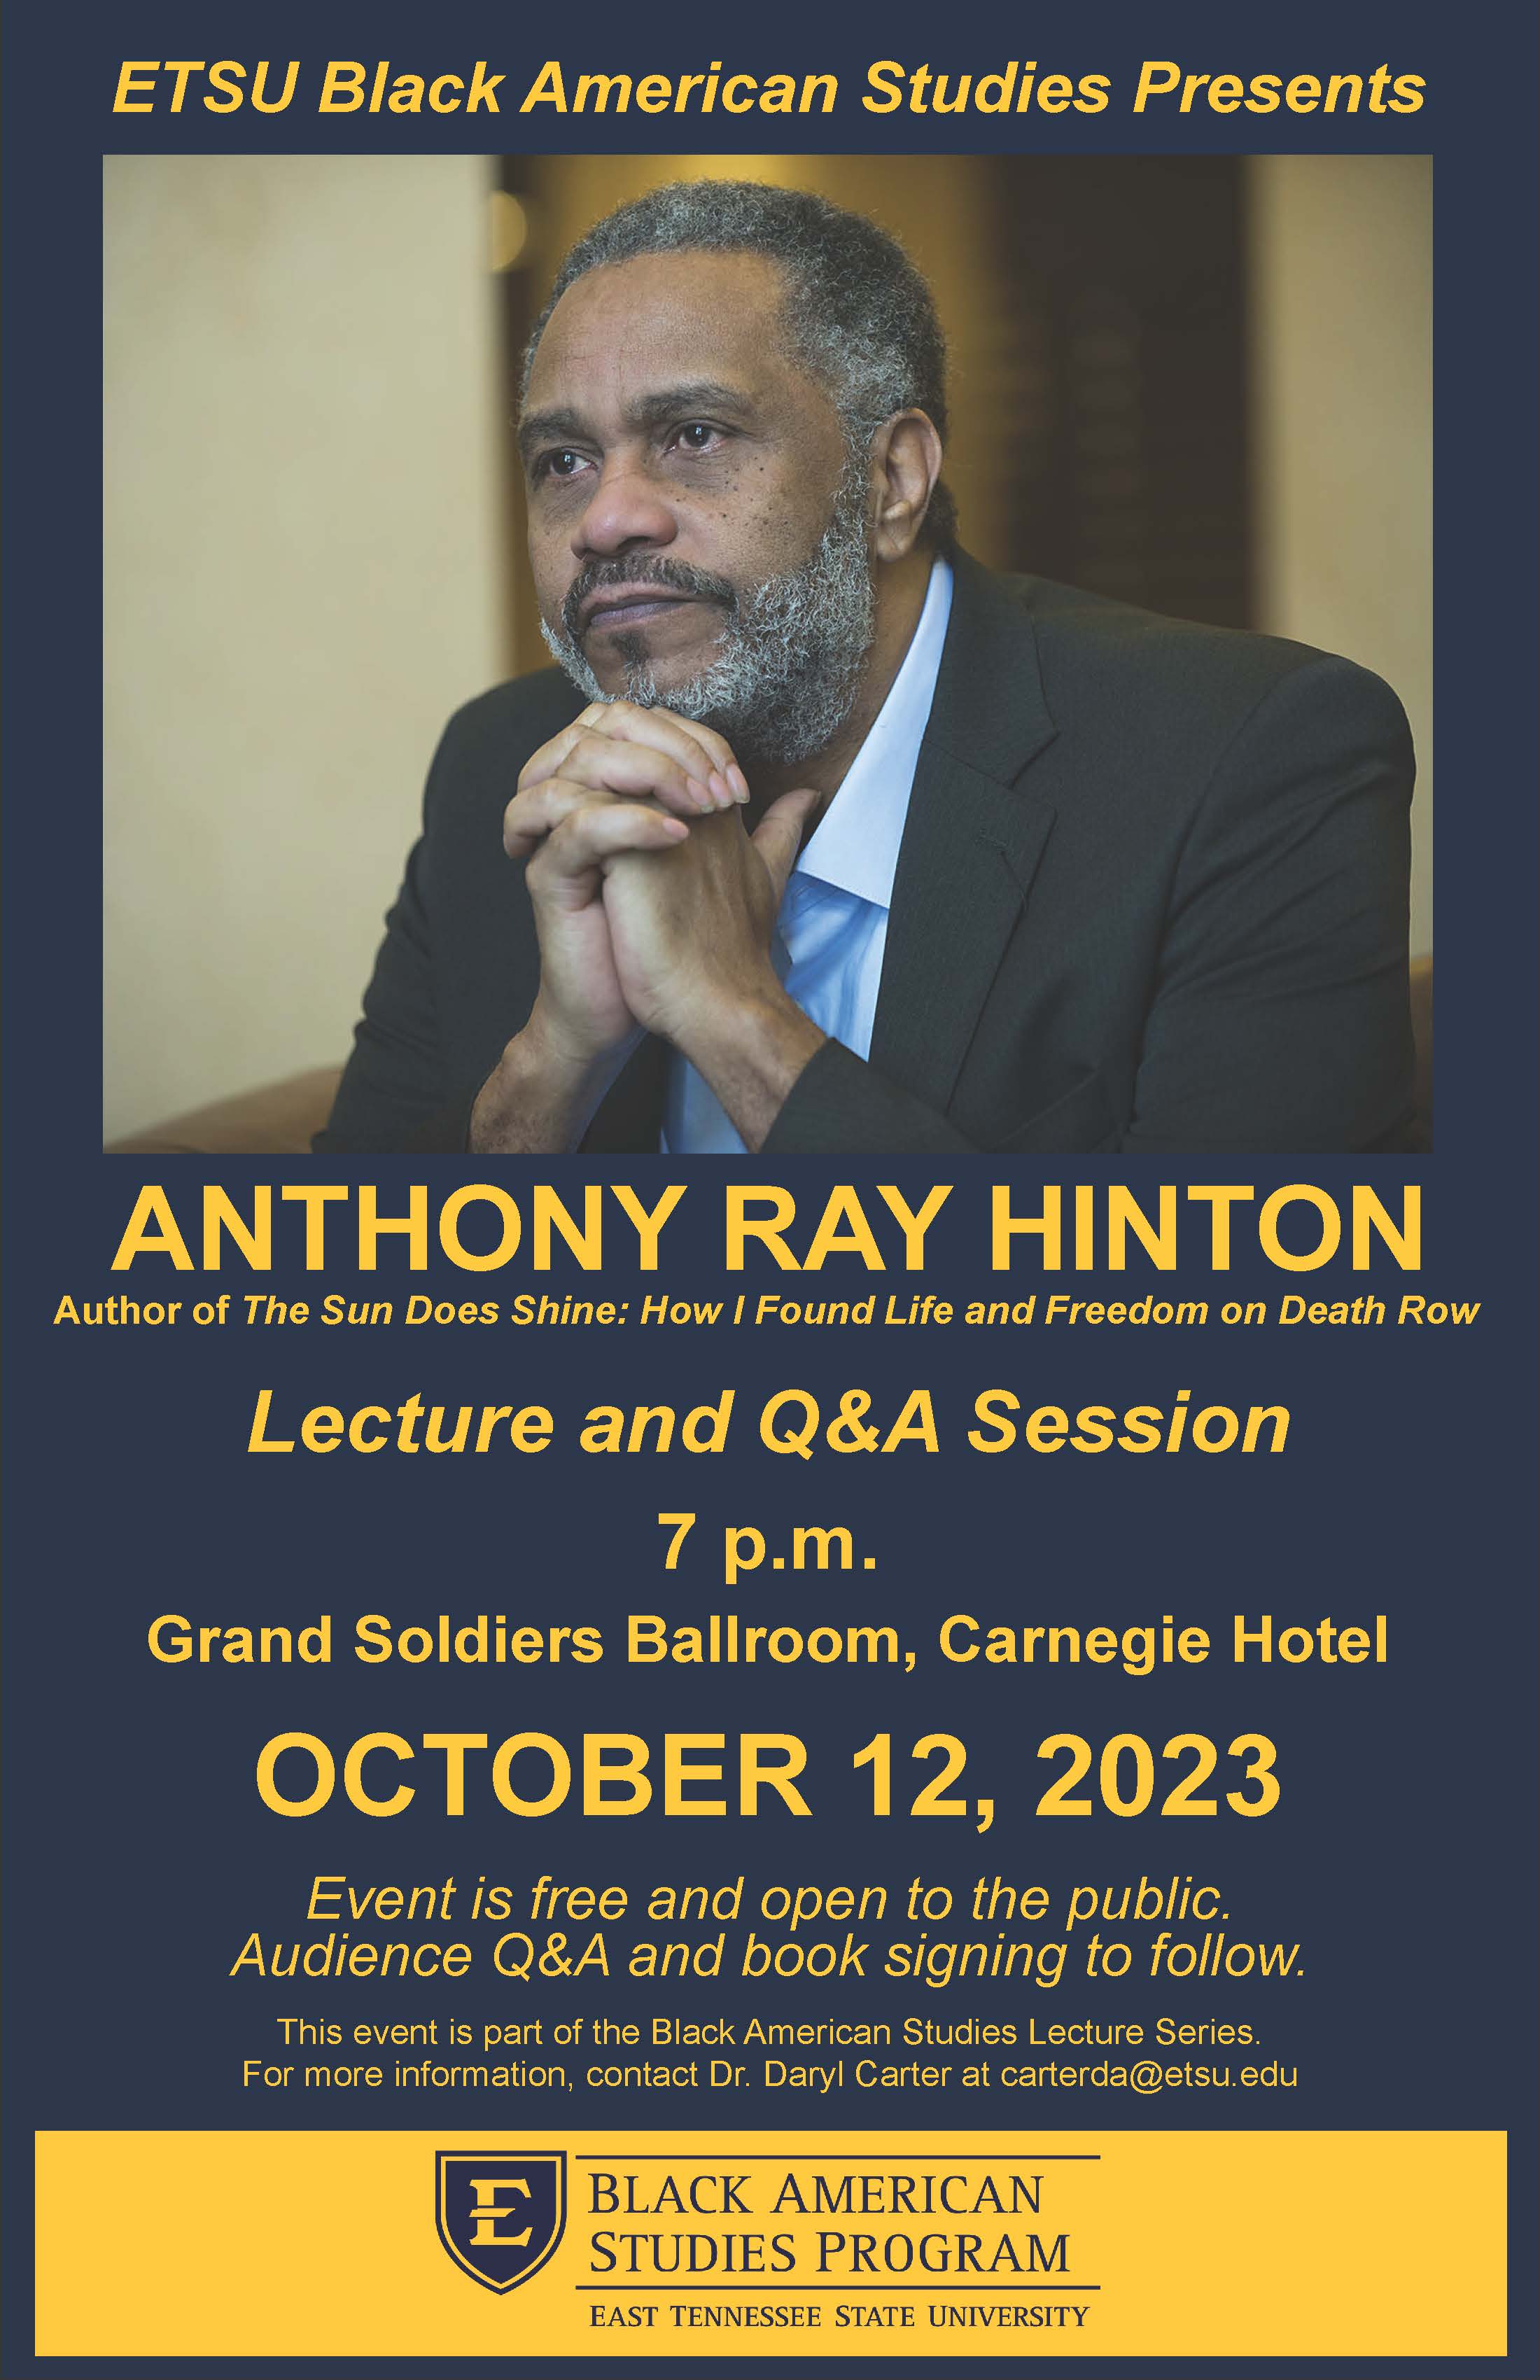 Anthony Hinton flyer with event information detailed in the commentary above